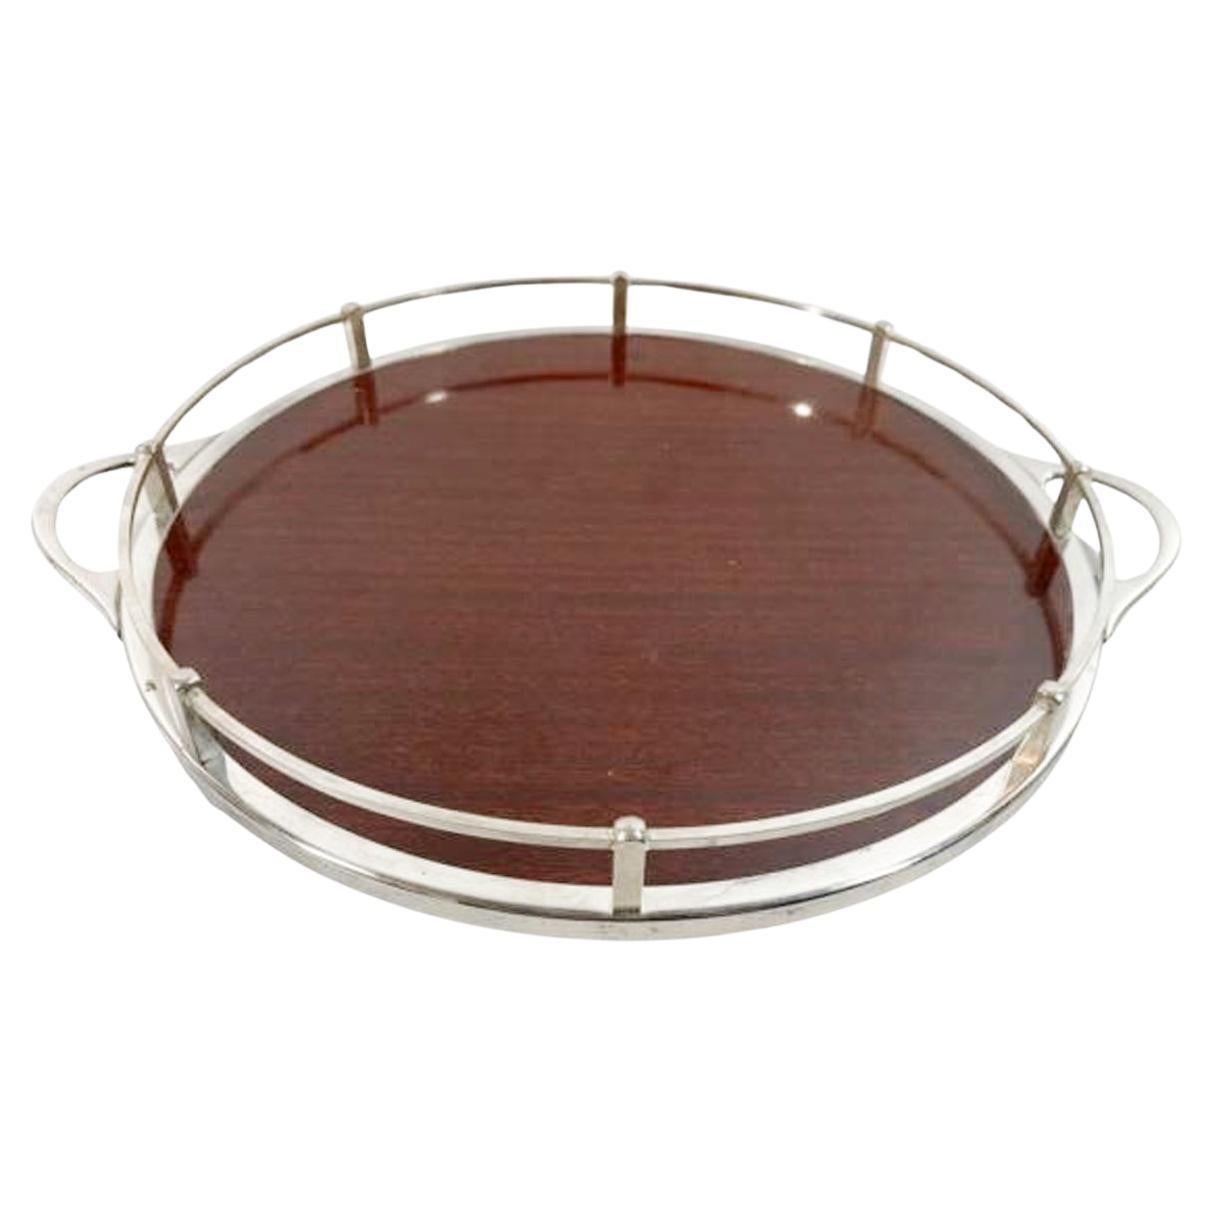 Round Art Deco Silver Plate Galleried Serving Tray with Wood Grained Formica